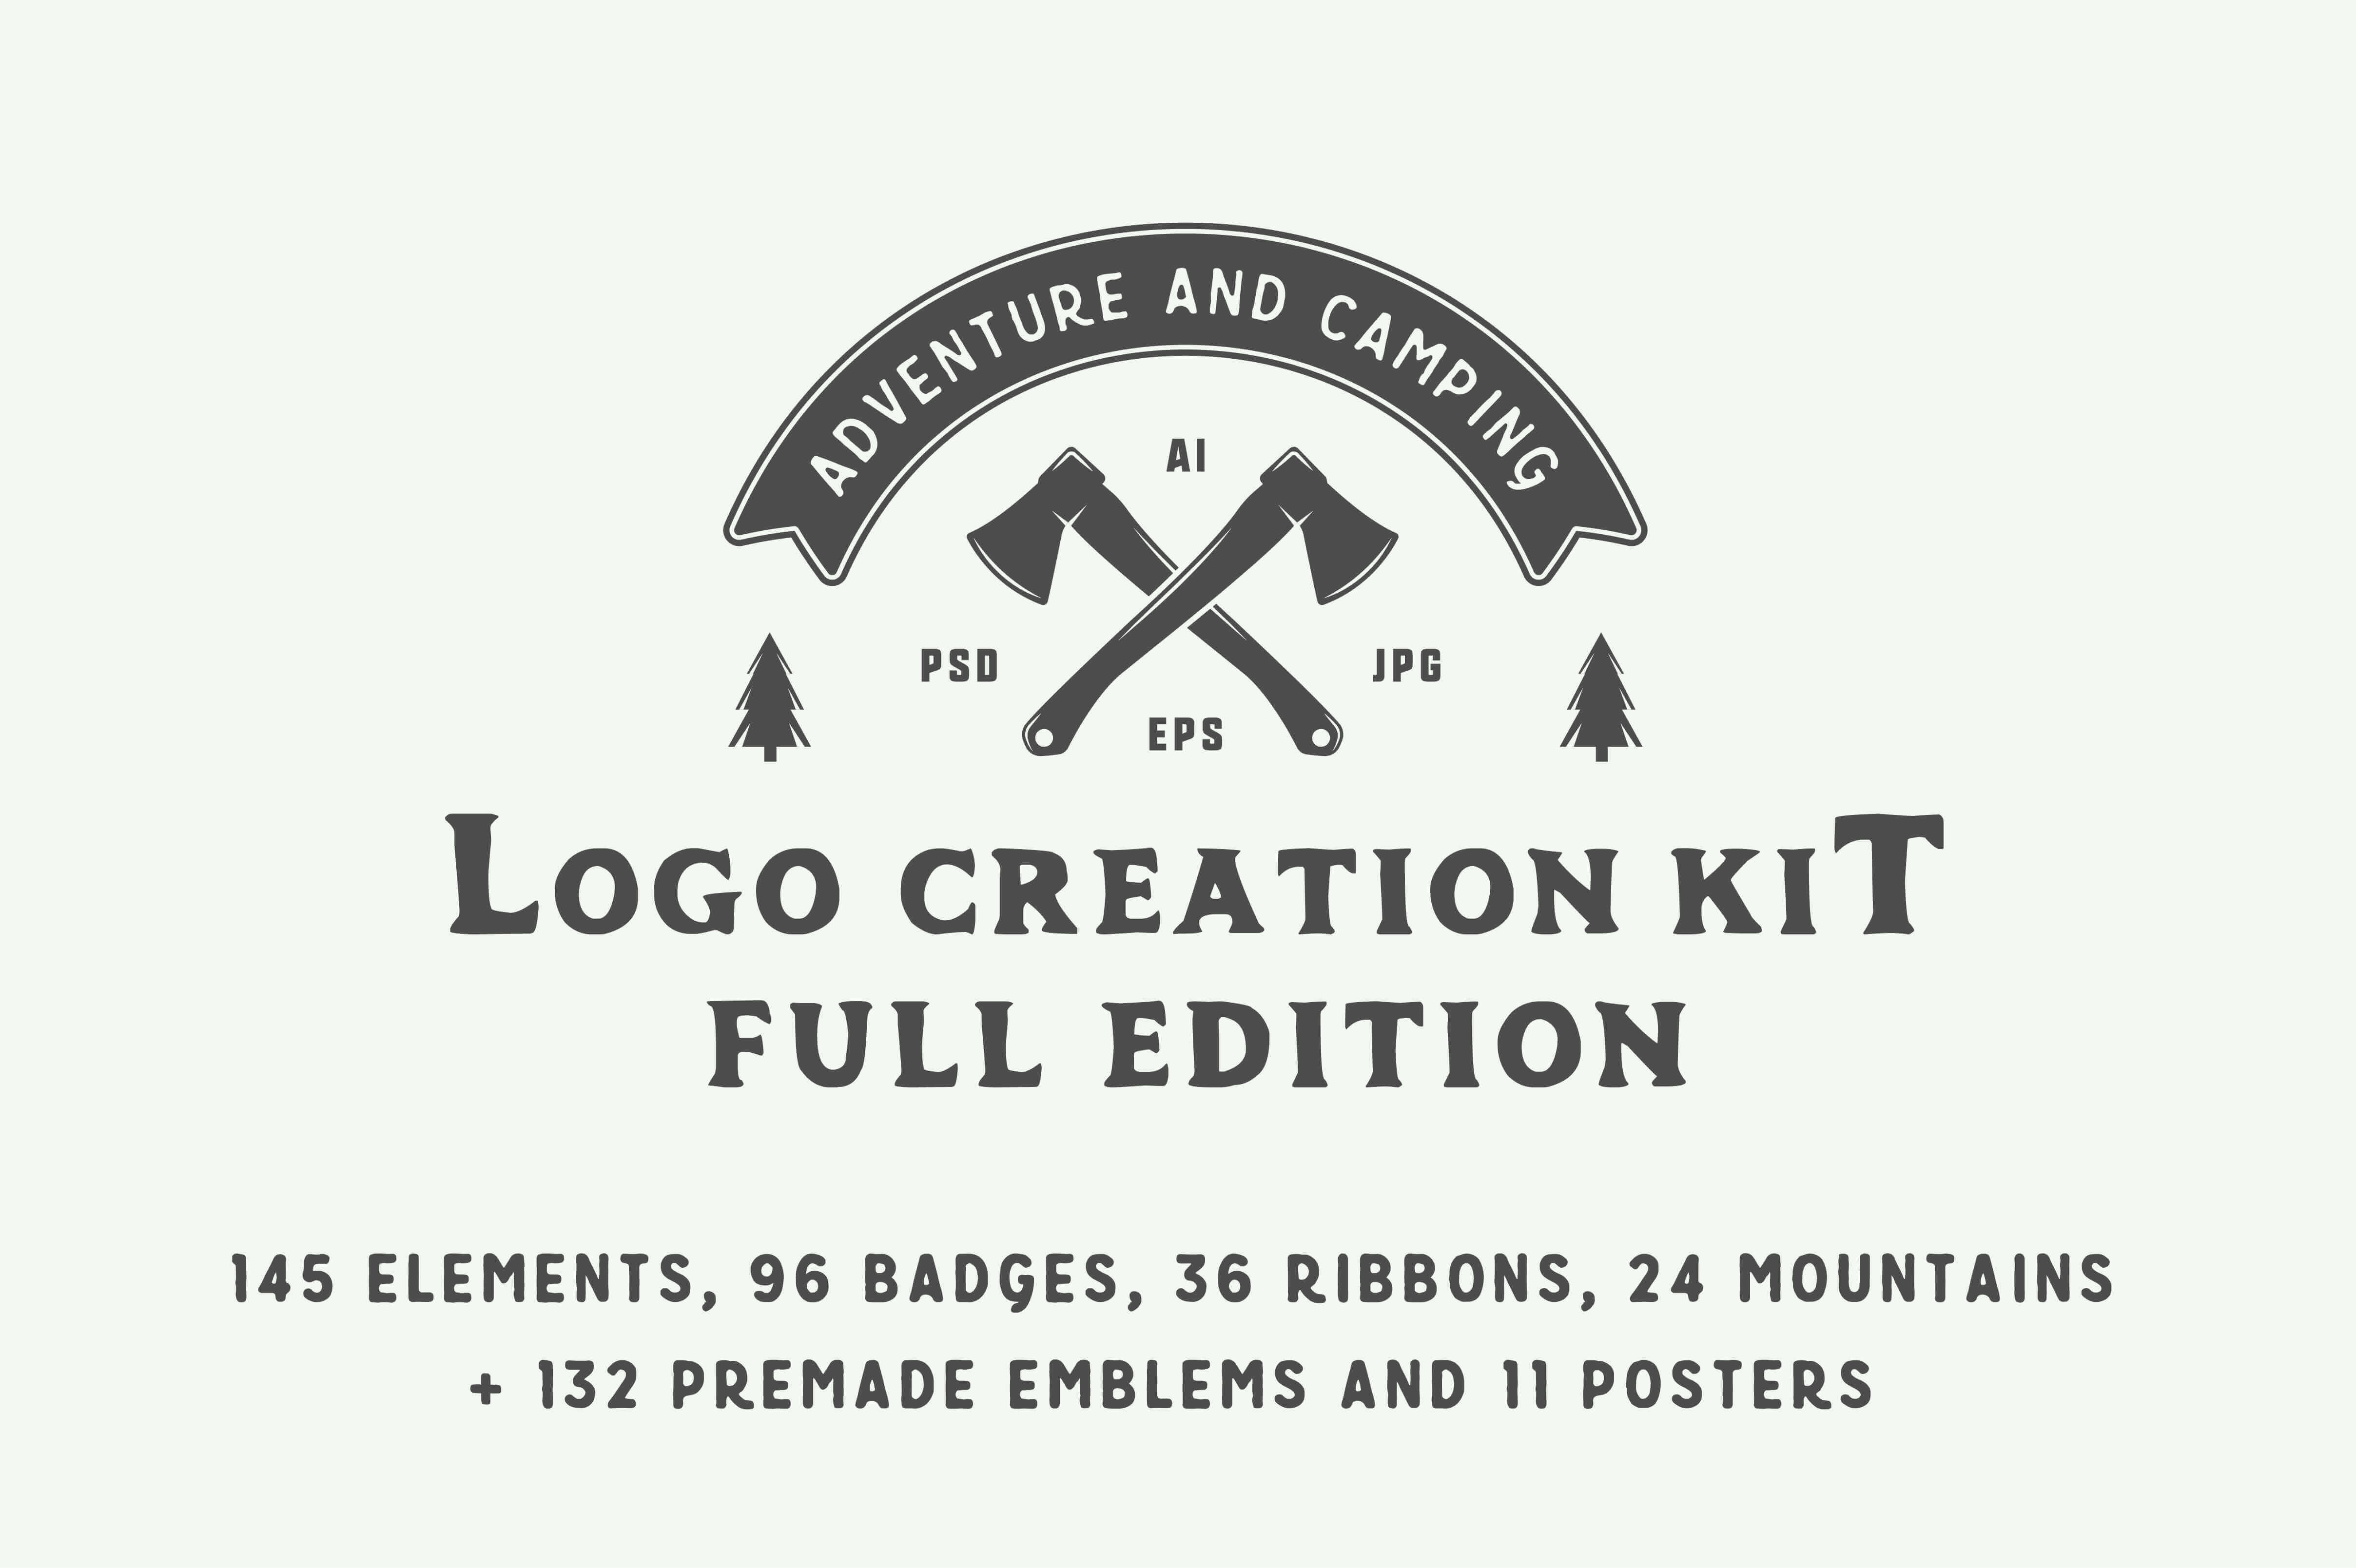 Only Logo - Adventure and Camping Logo Creation Kit - only $14! - MightyDeals